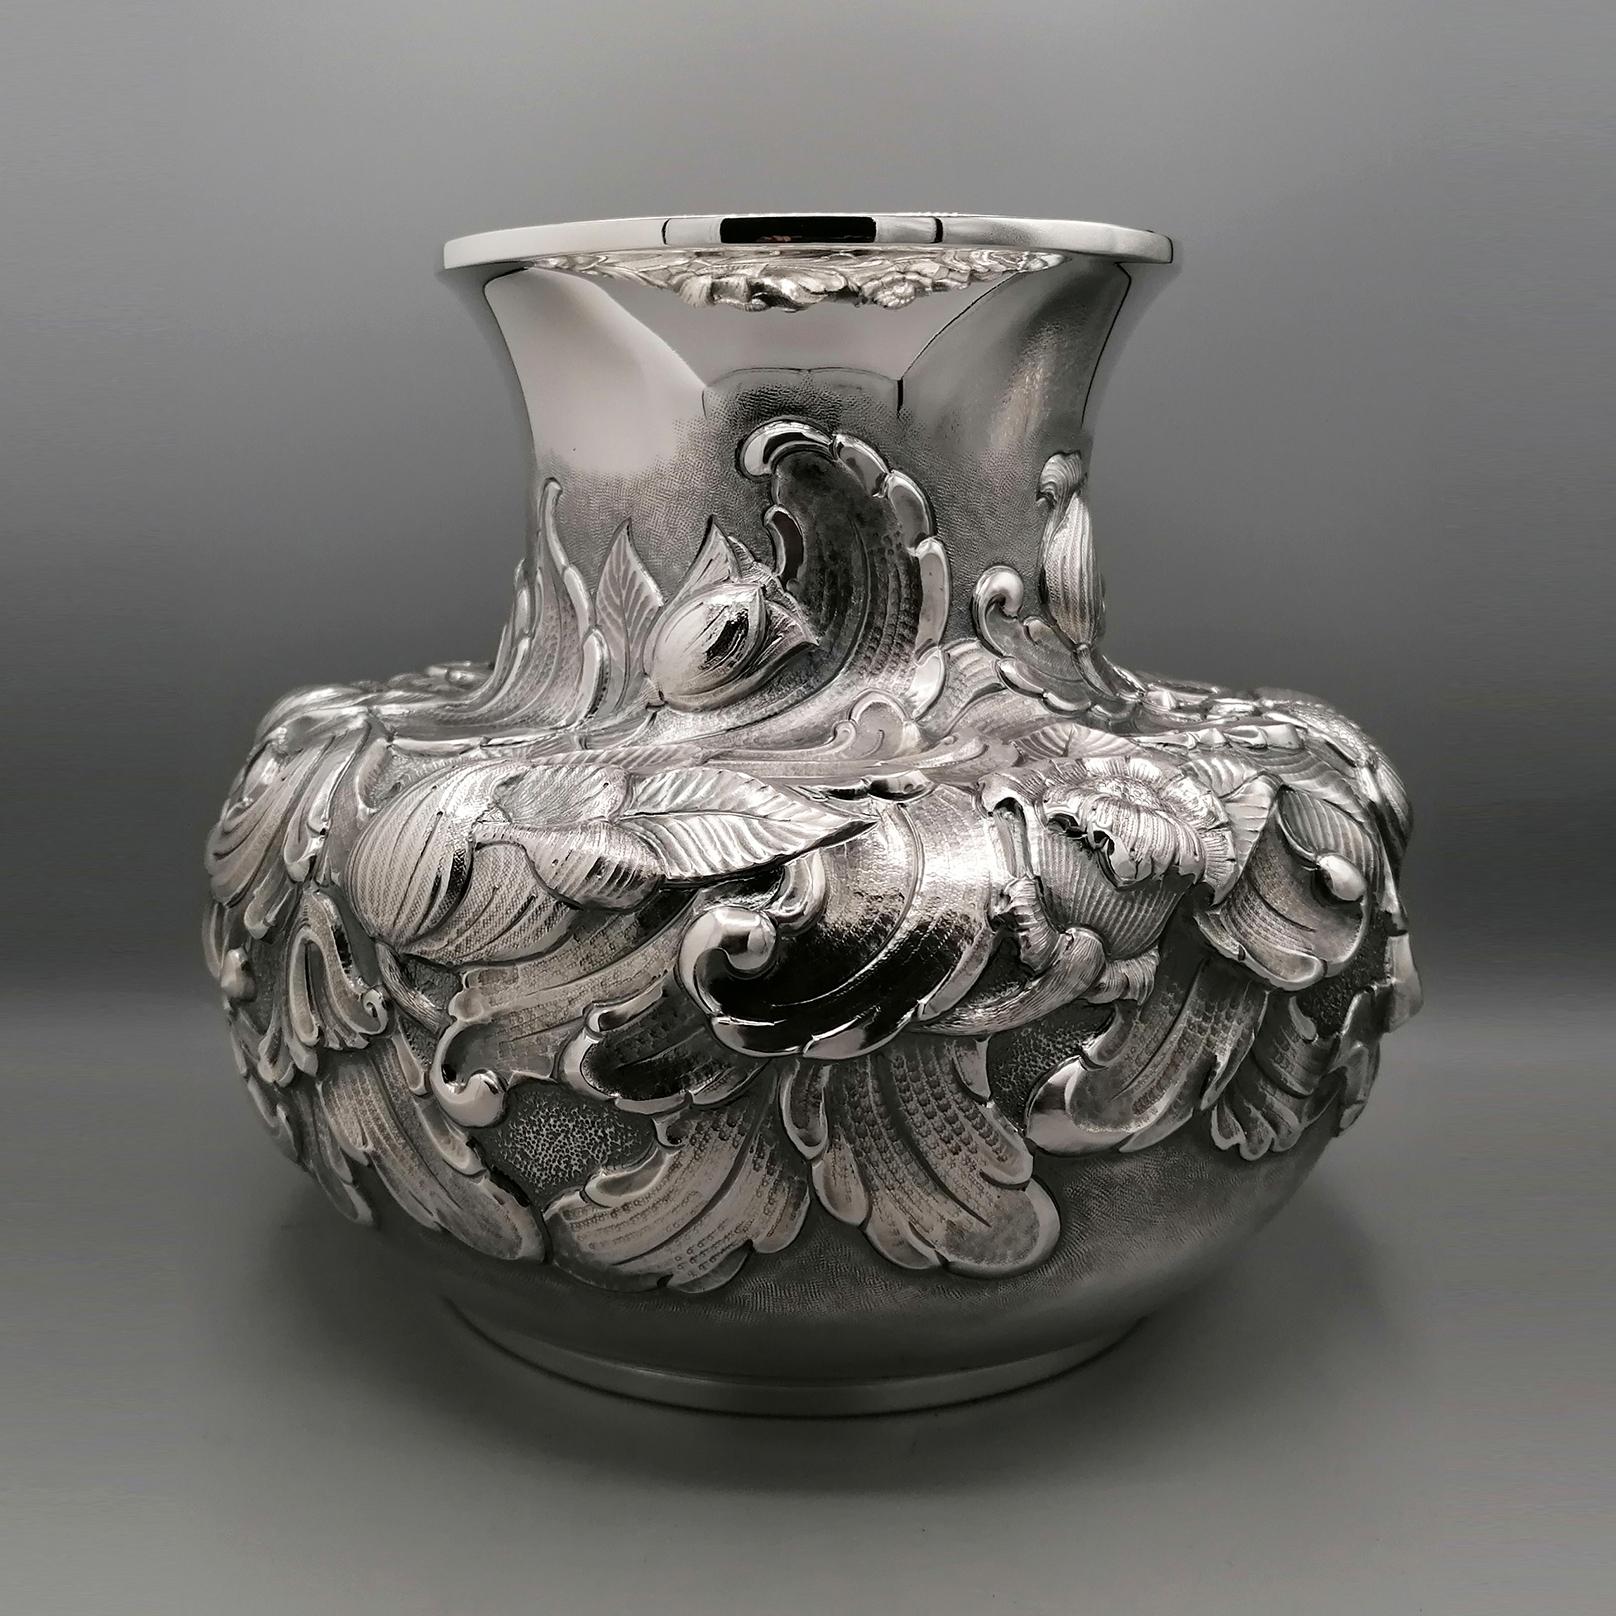 Large and impressive embossed sterling silver vase.
The body of the vase is pot-bellied while the upper part ends with a very large mouth which allows the placement of a large bouquet of flowers.
An important embossed work has been created on the